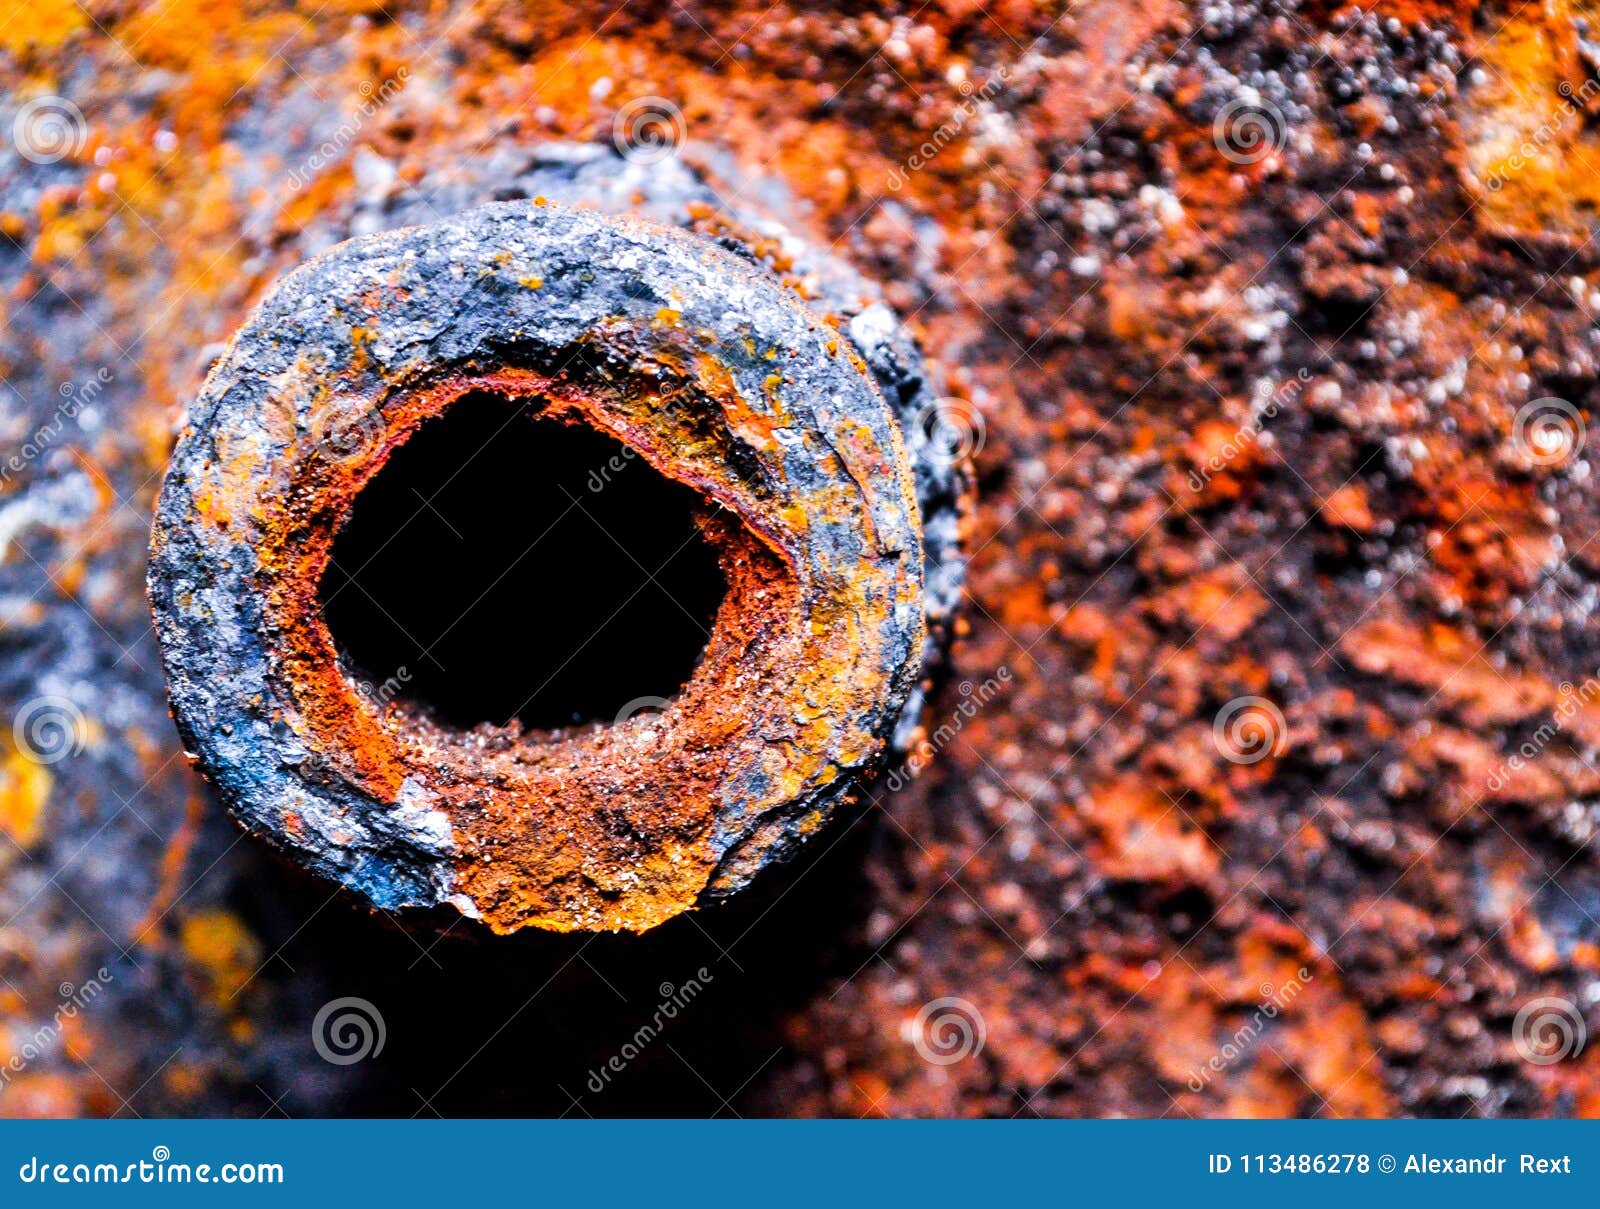 metal, rust, corrosion, barrel, container